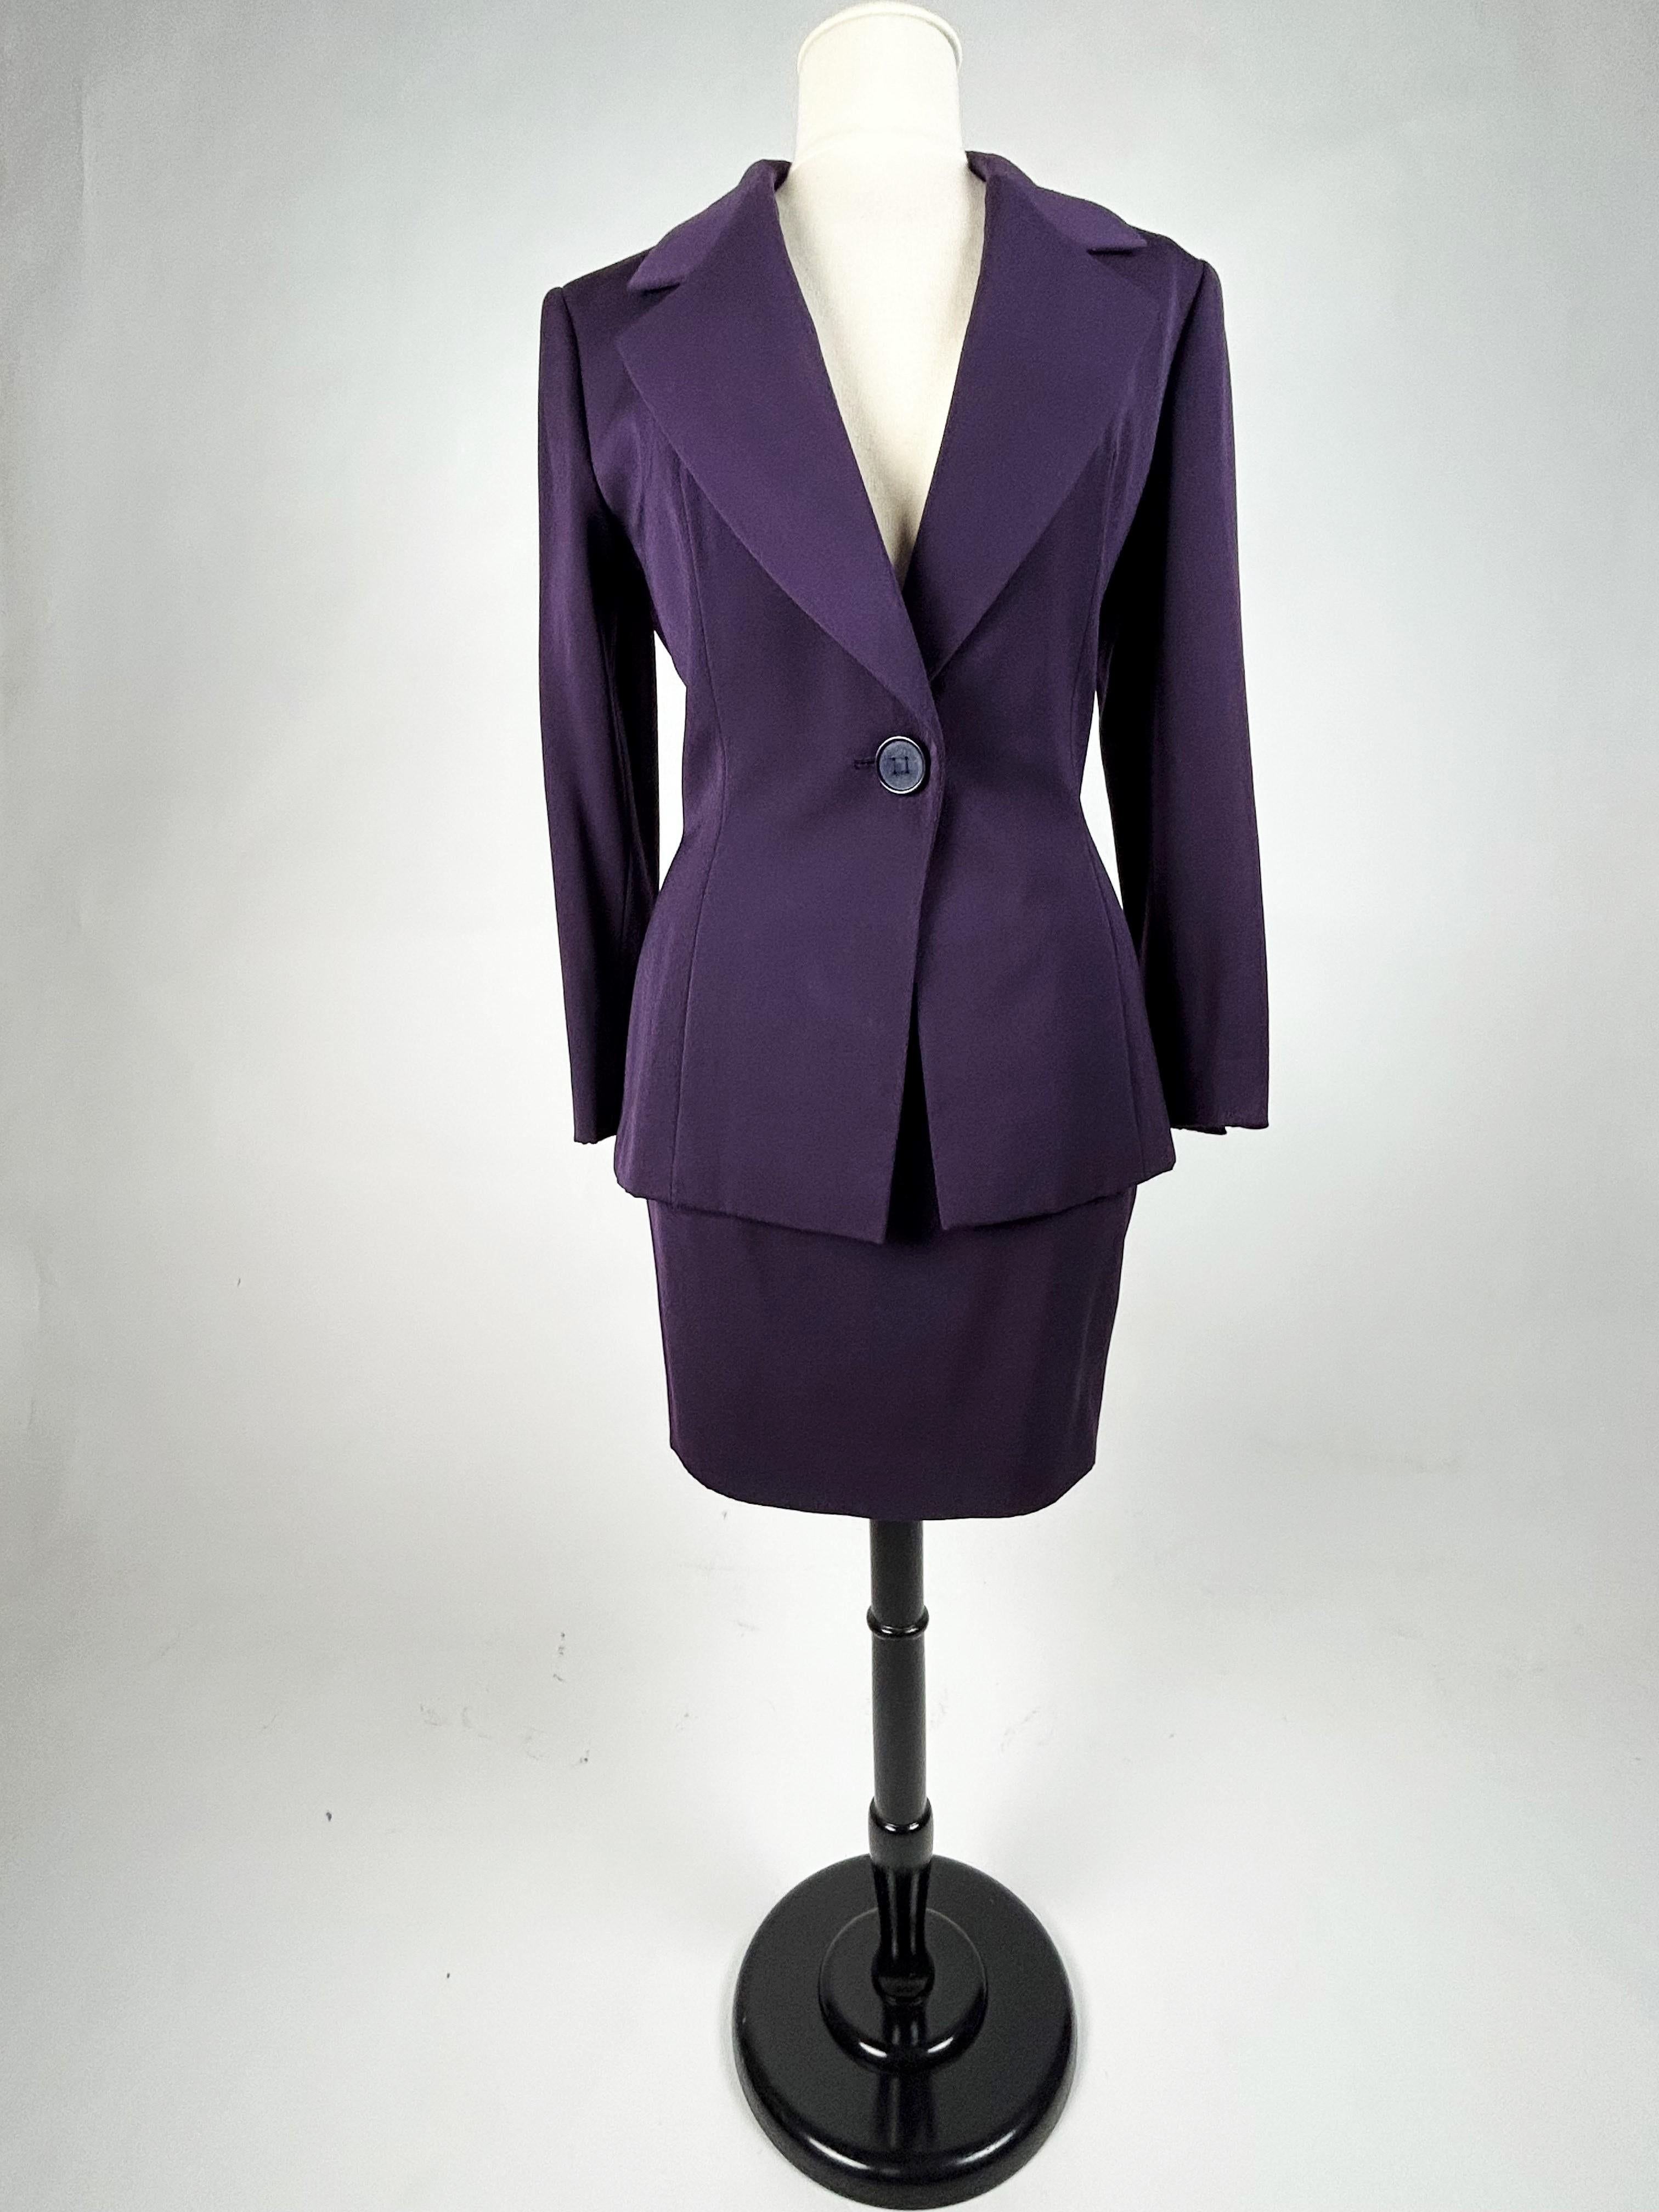 Black Skirt suit by Gianfranco Ferré for Christian Dior Haute Couture Circa 1995 For Sale